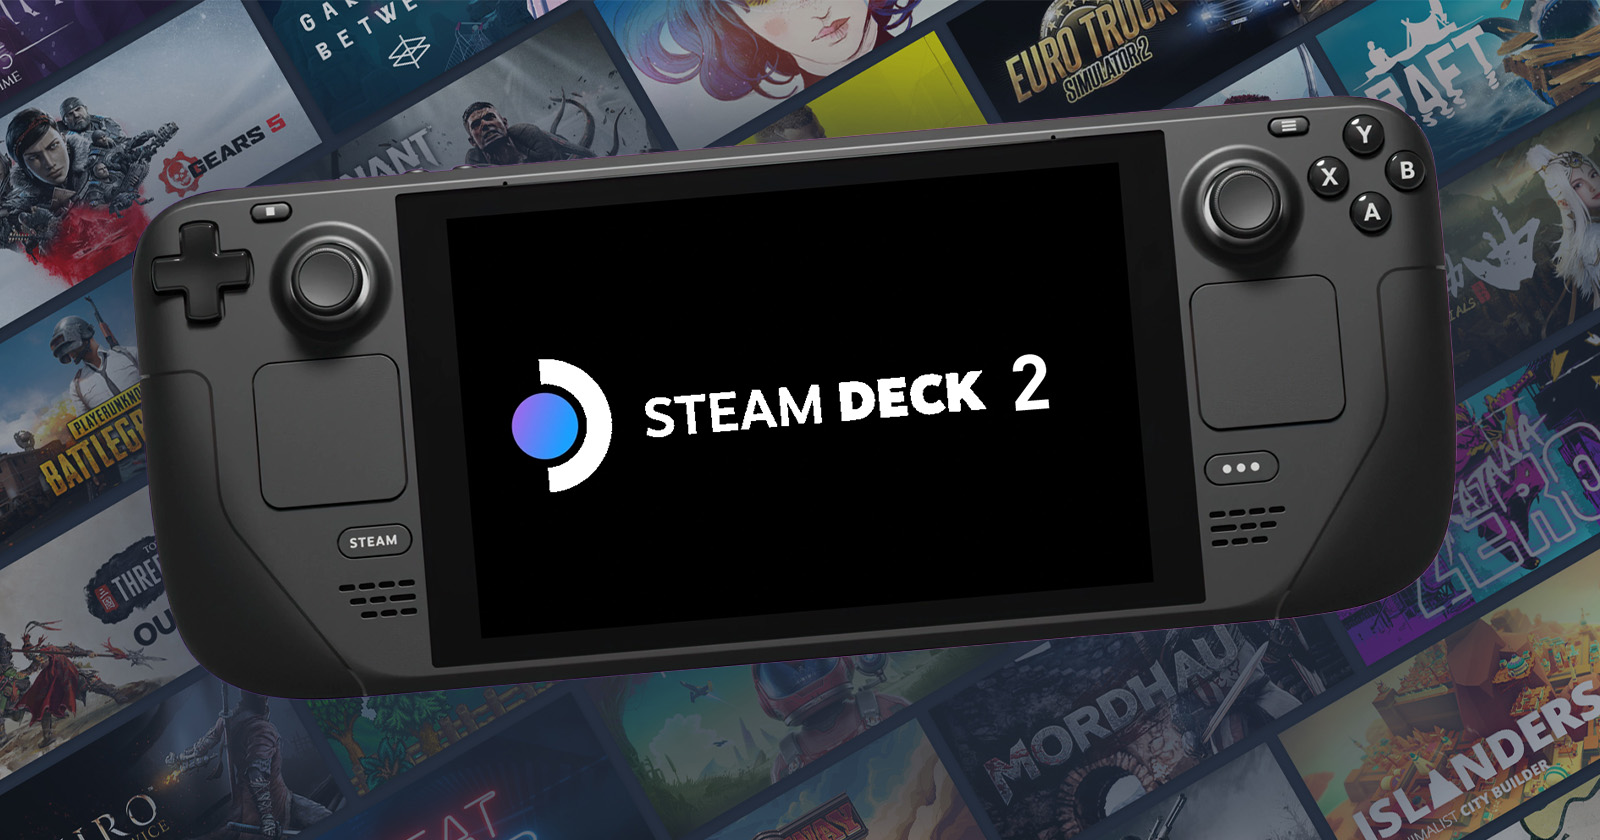 Valve launches its Steam Deck console starting at $399, now available for  pre-order - Gizmochina